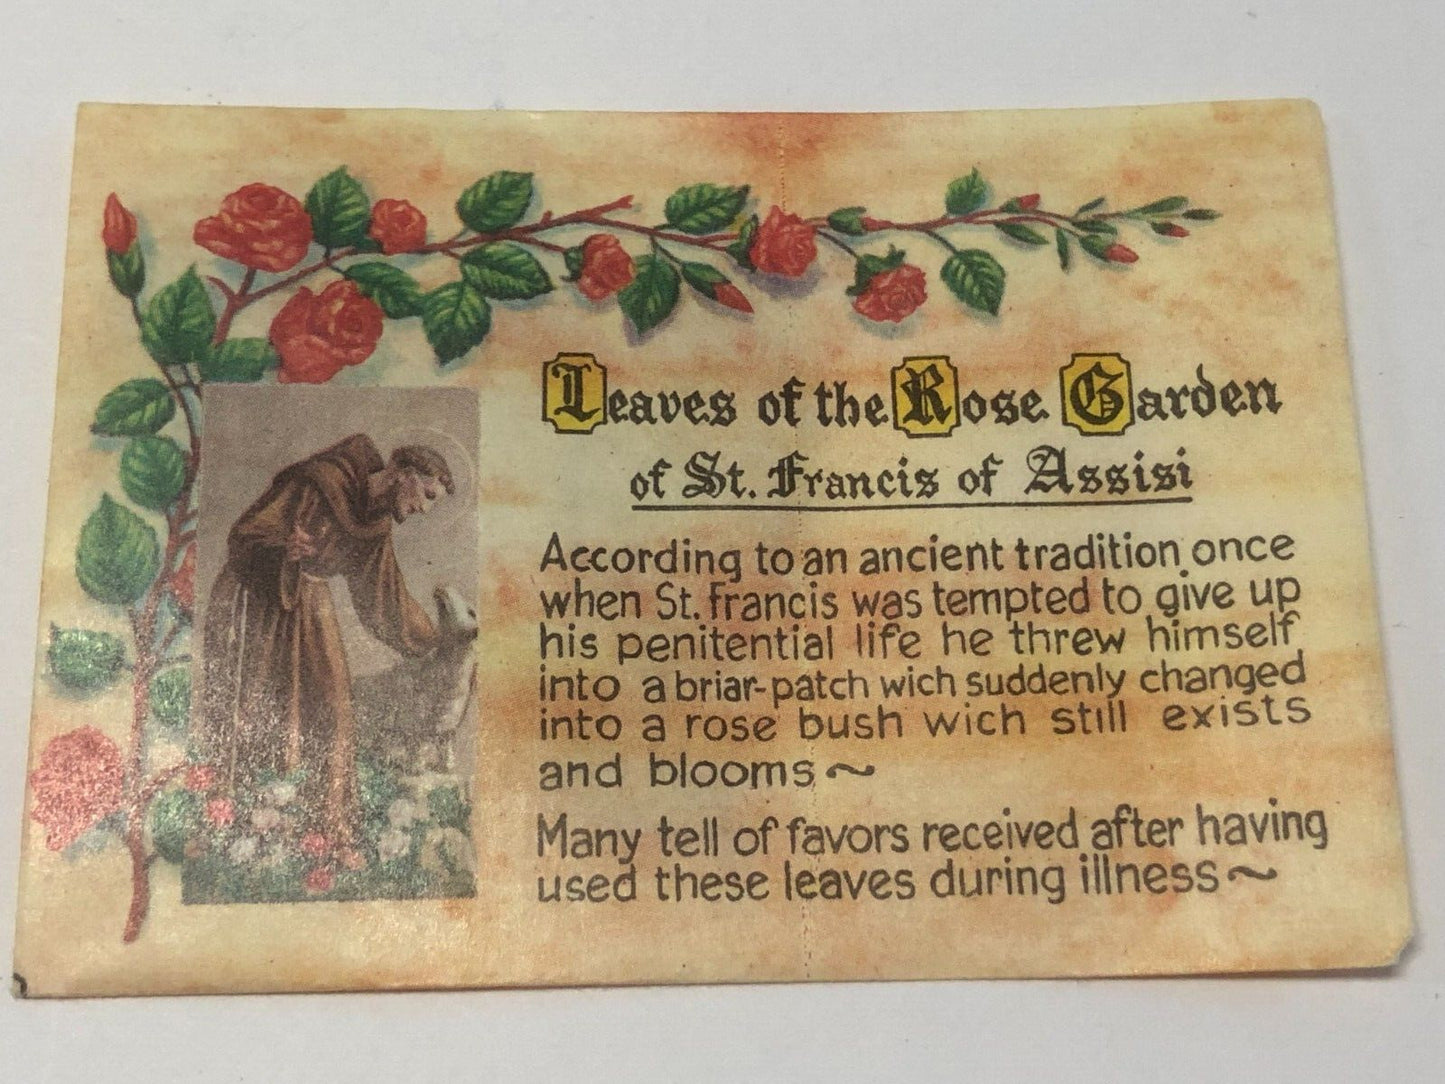 Saint Francis of Assisi Leaves from his Rose Garden, New from Italy  (E)